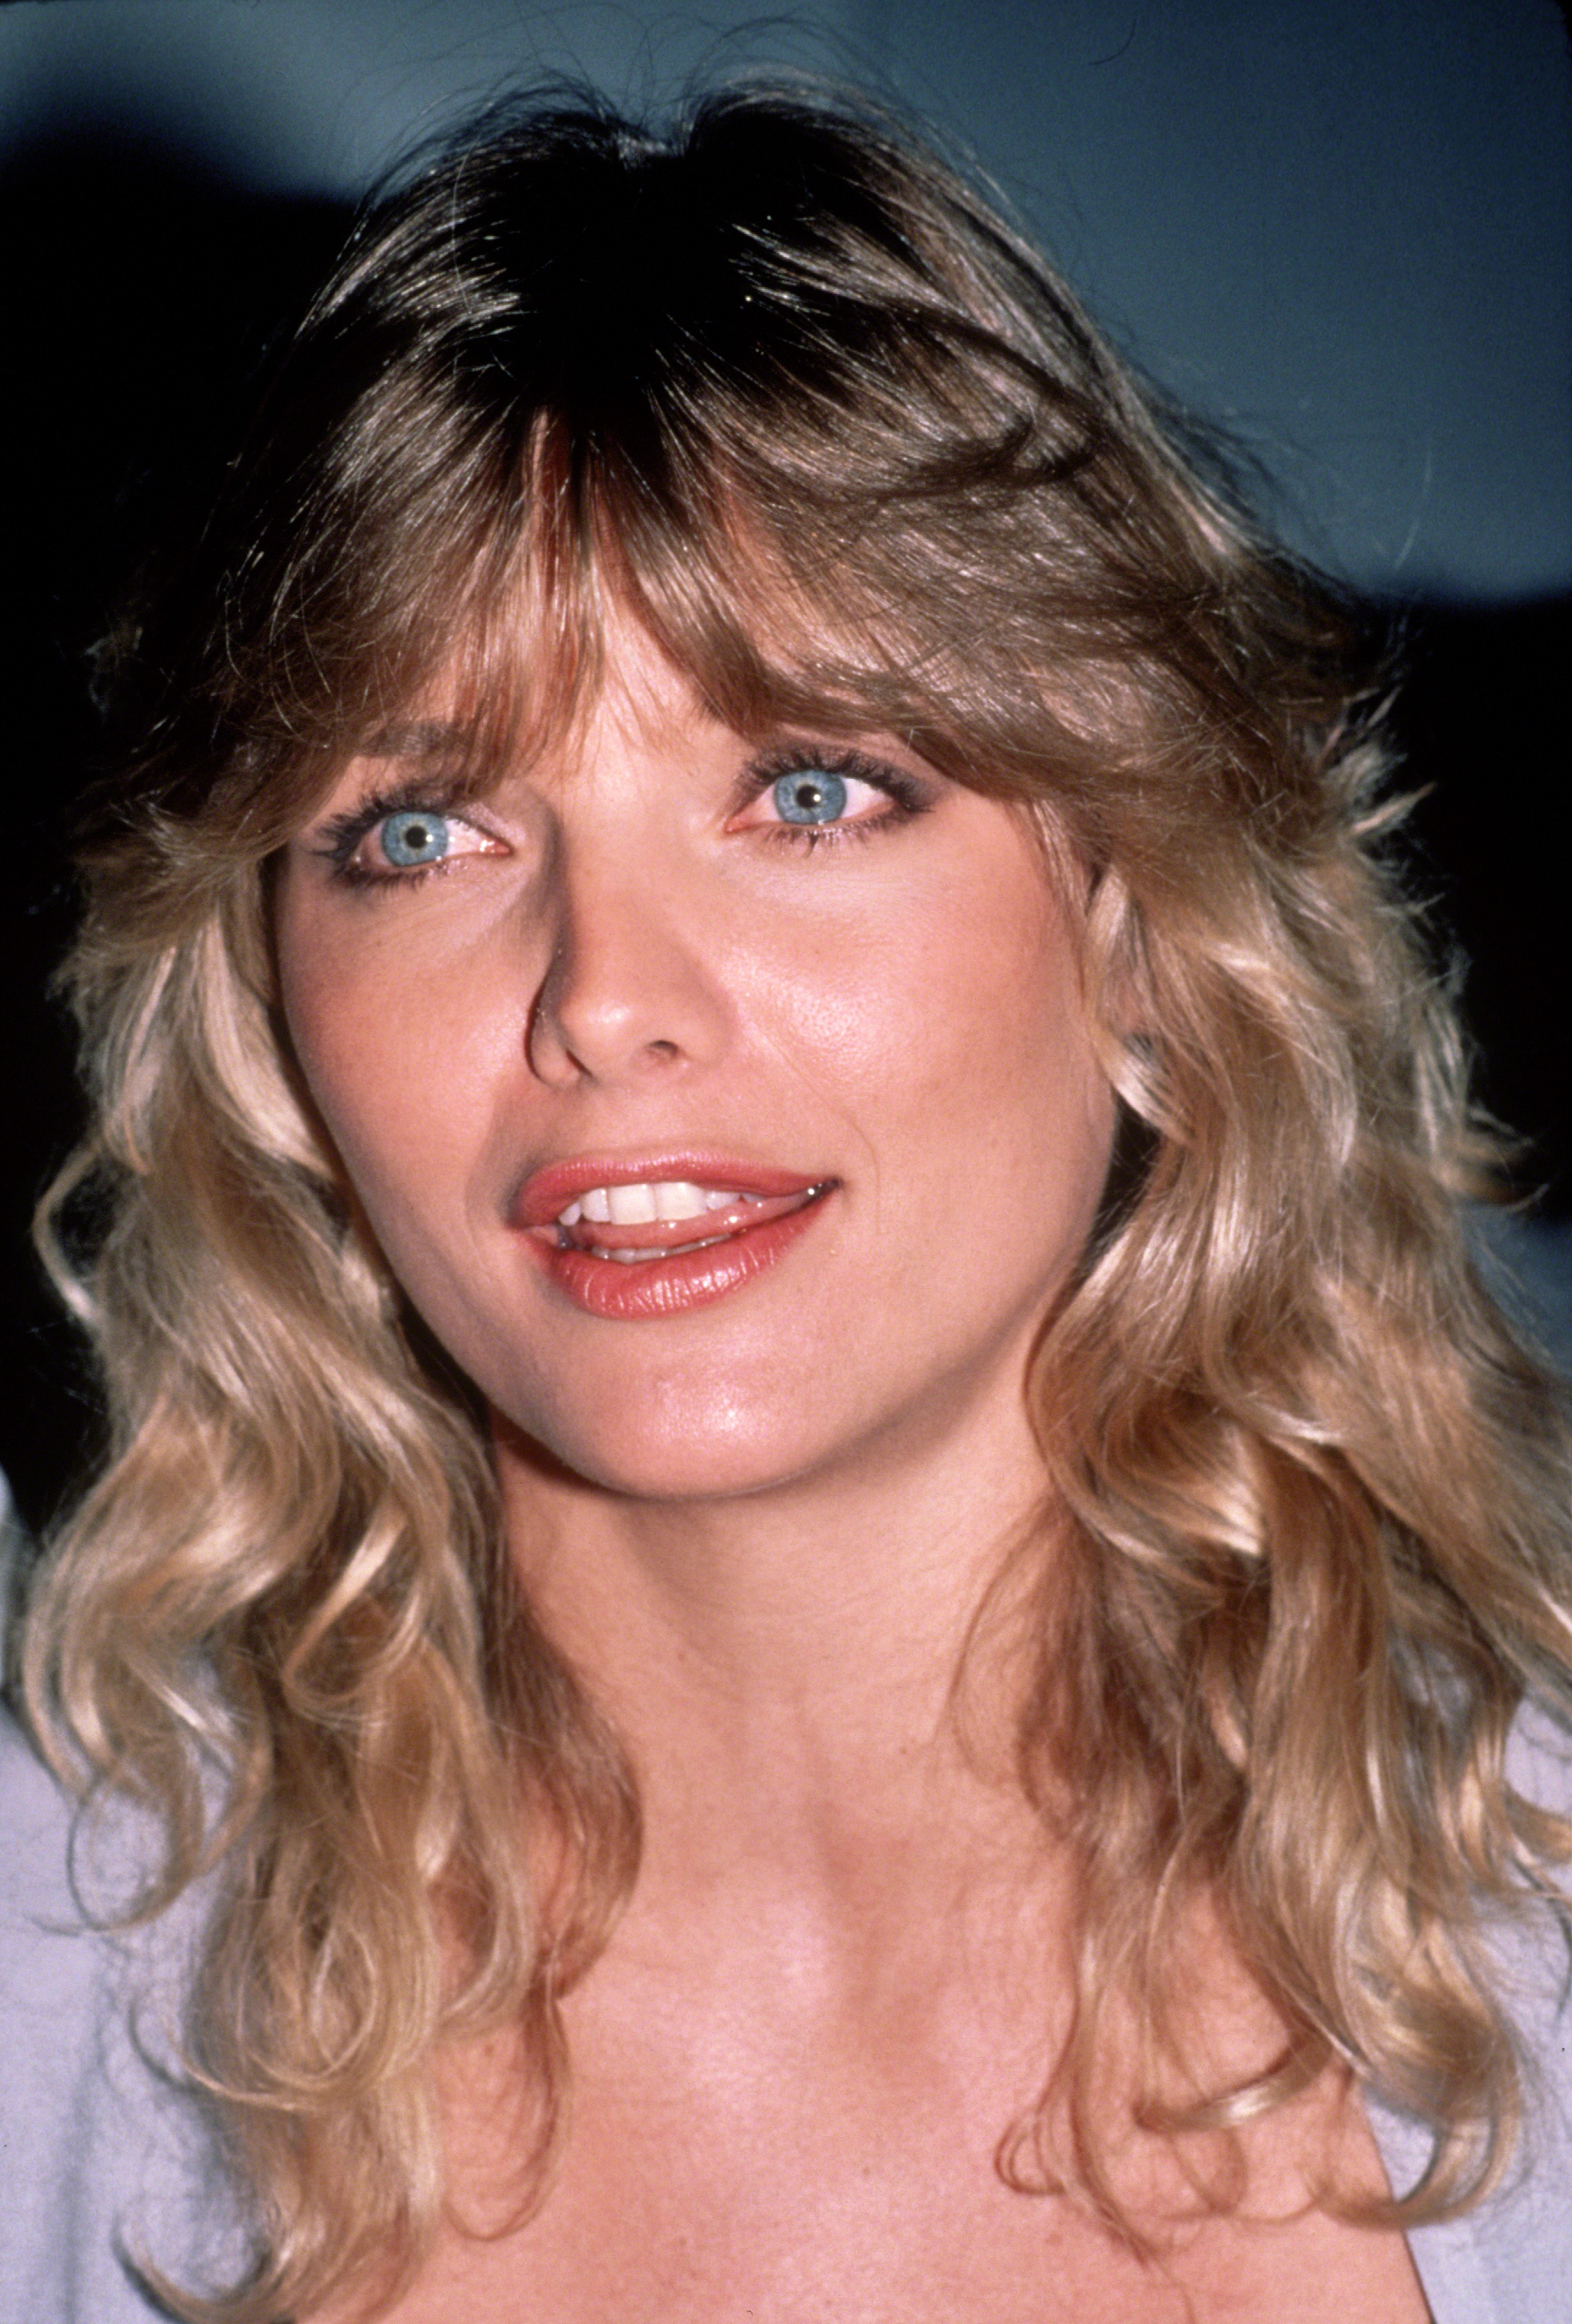 Michelle Pfeiffer posing for a photo in New York City, circa 1982 | Source: Getty Images